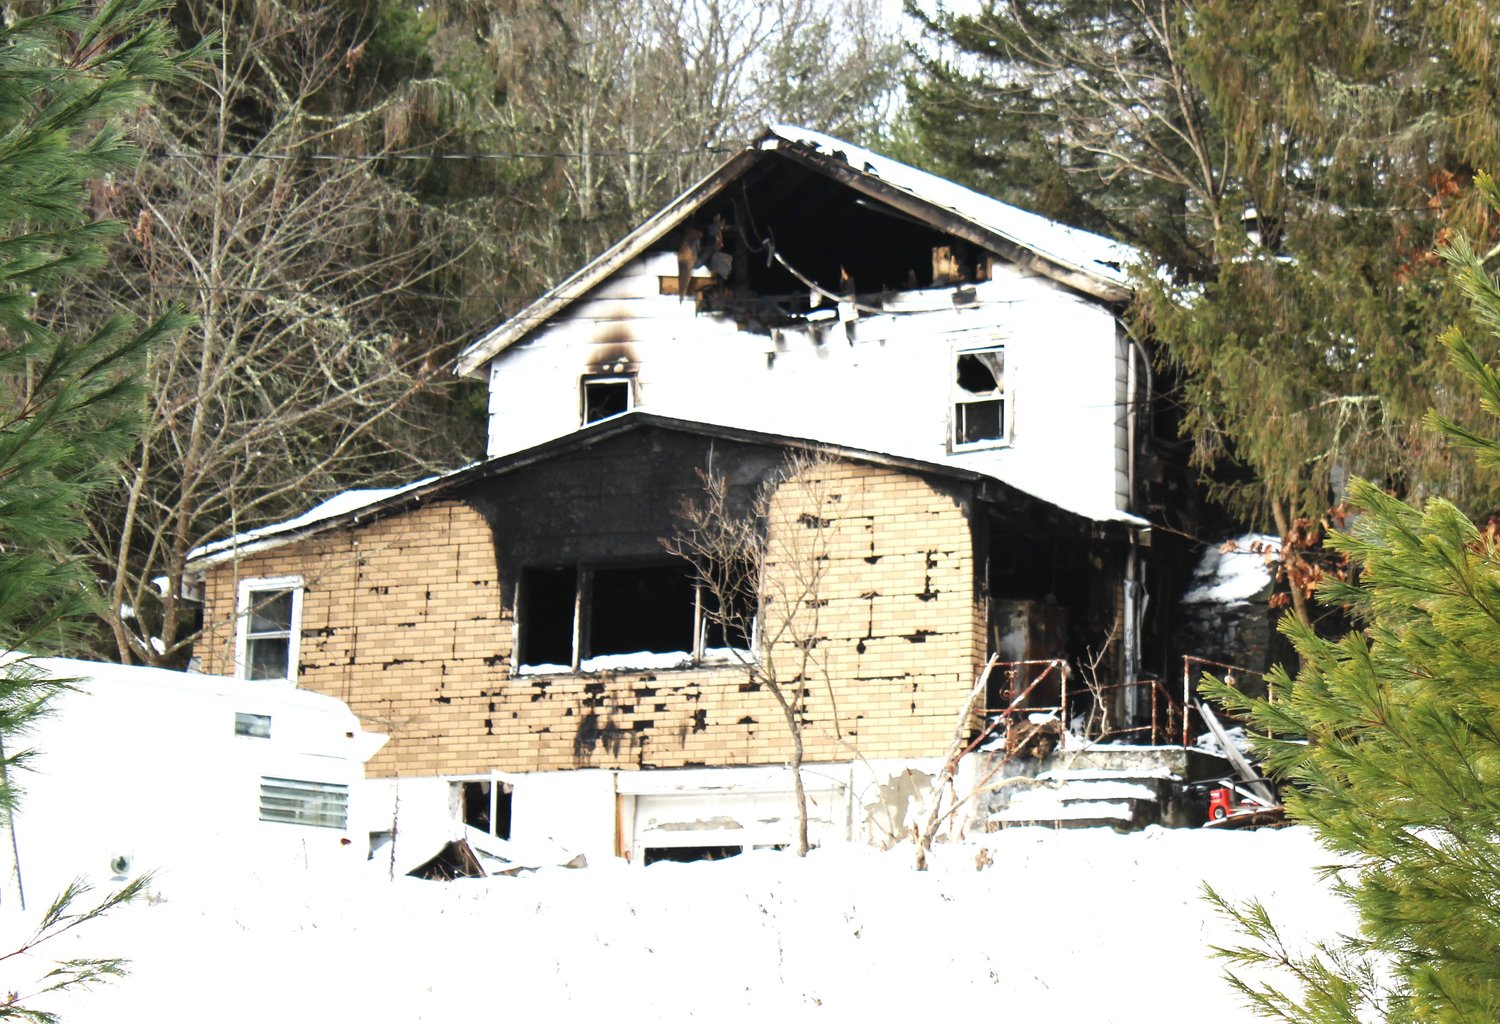 Despite the best efforts of five fire companies, the home of Charlie Blanchard and his daughter Raven was destroyed on the evening of December 12. The house was declared uninhabitable and all possessions were lost.